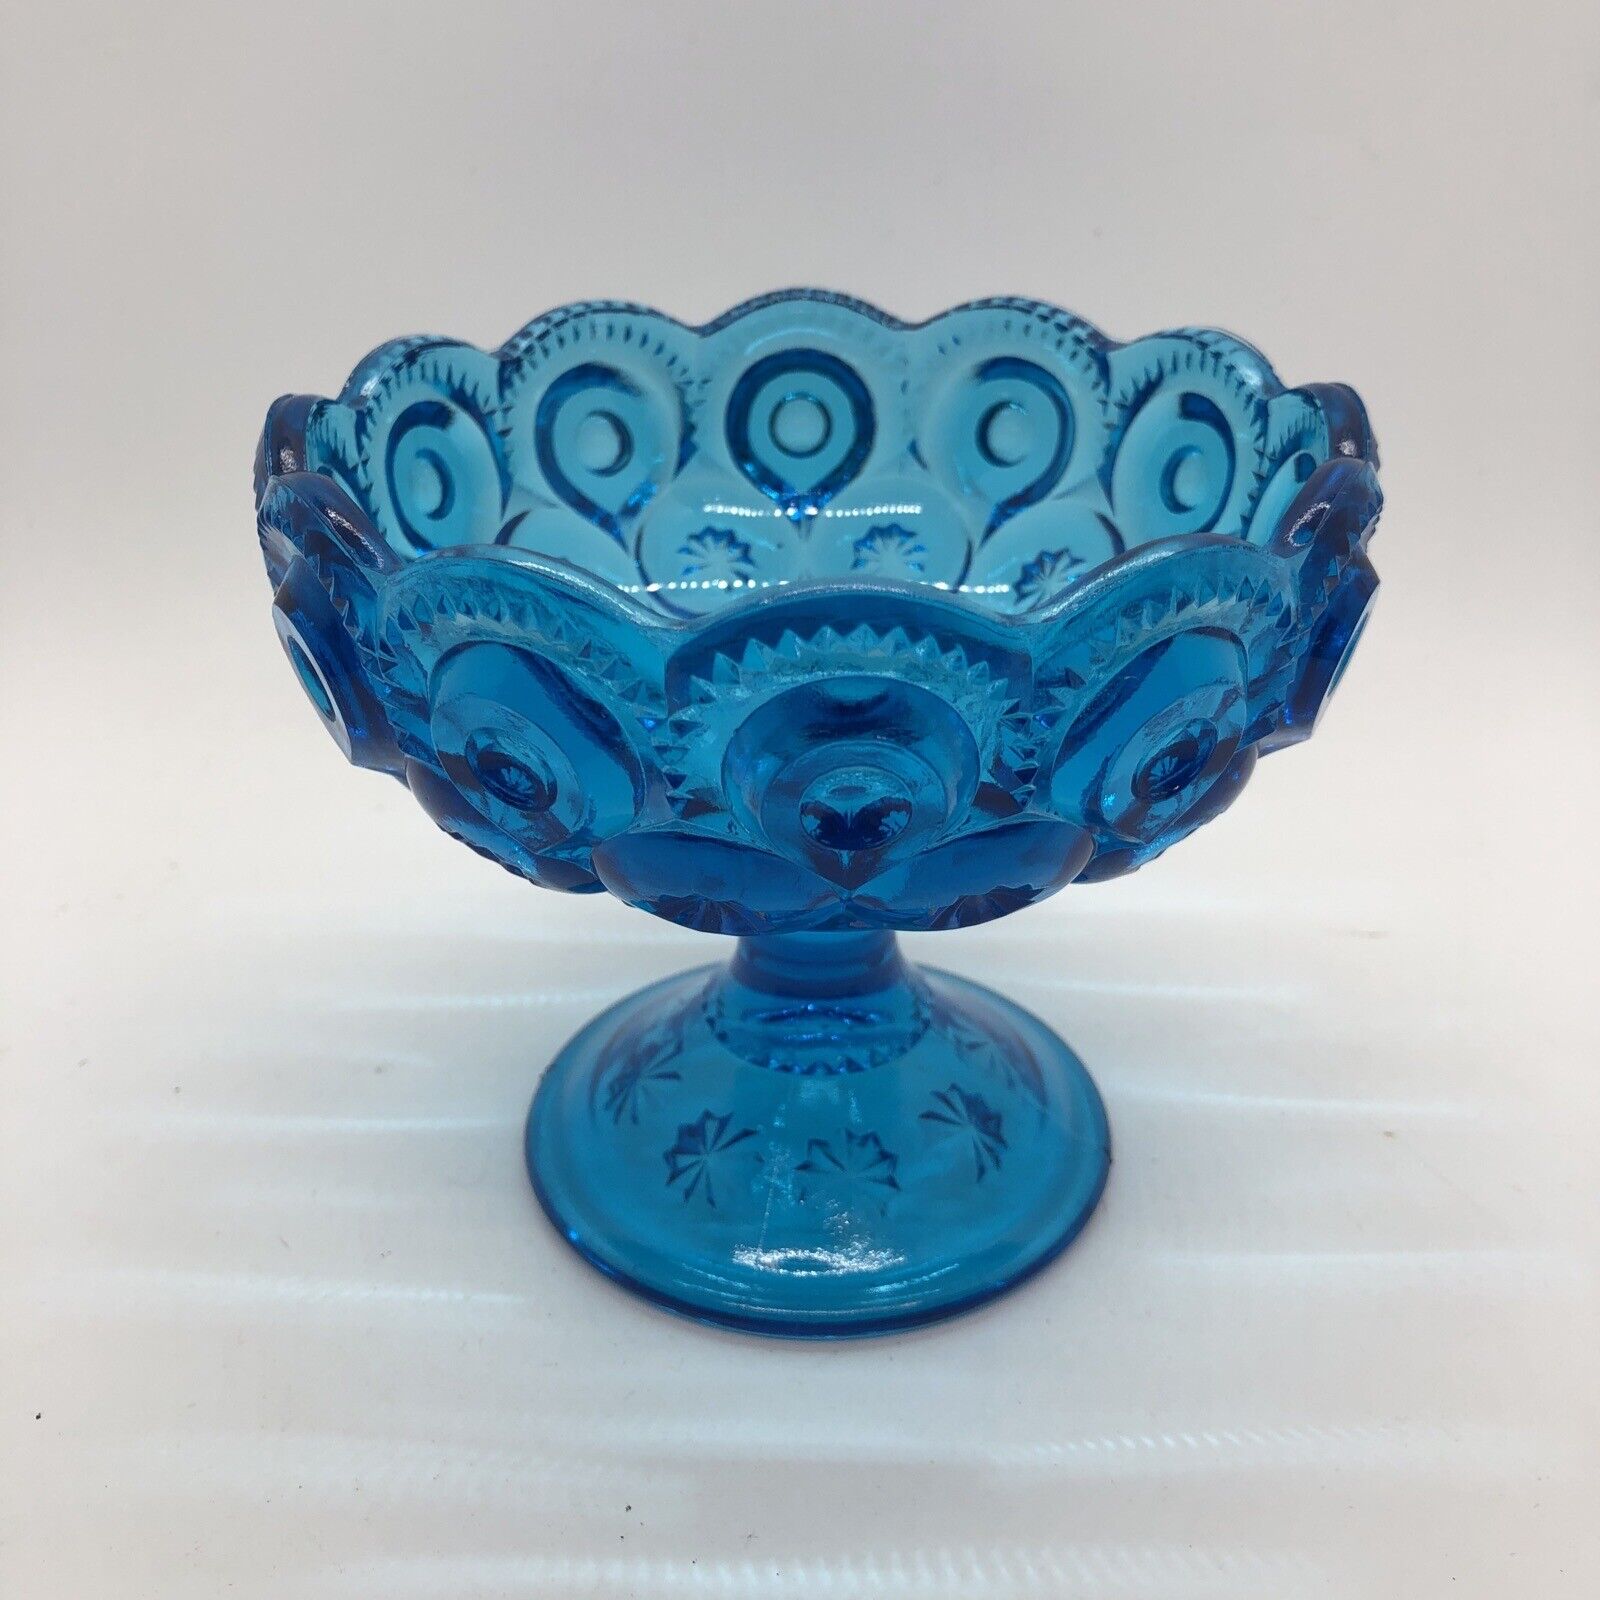 L.E. Smith Moon And Stars Blue Open Compote Bowl 4” Pedestal Dessert Candy